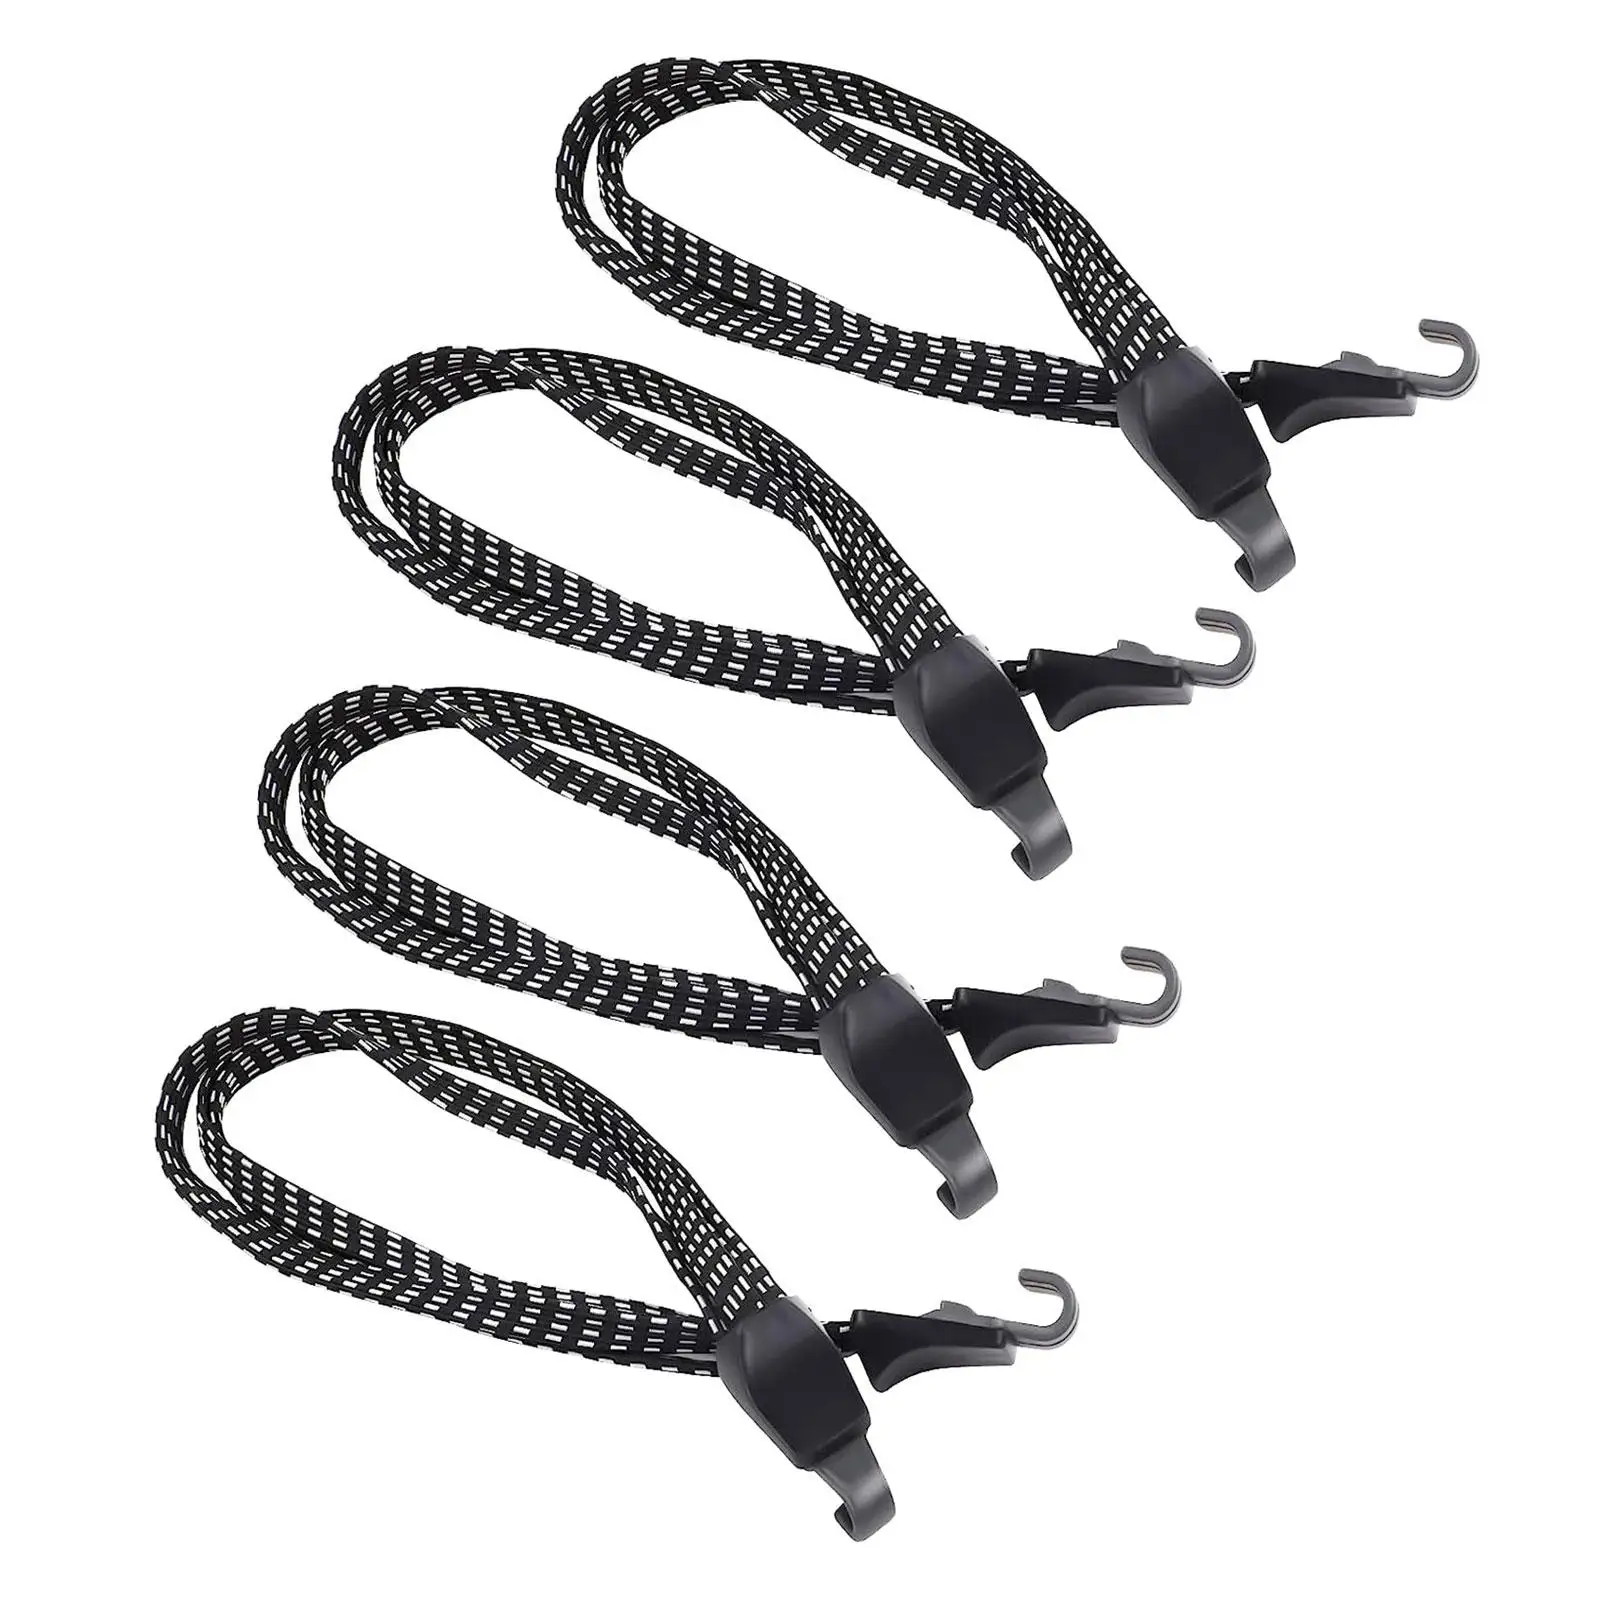 4x Bike Luggage Rope, Motorcycle Luggage Rack Tie Down Straps, Strong Luggage Belt, 3 in 1 Strap Bungee Cords with Hooks, Black